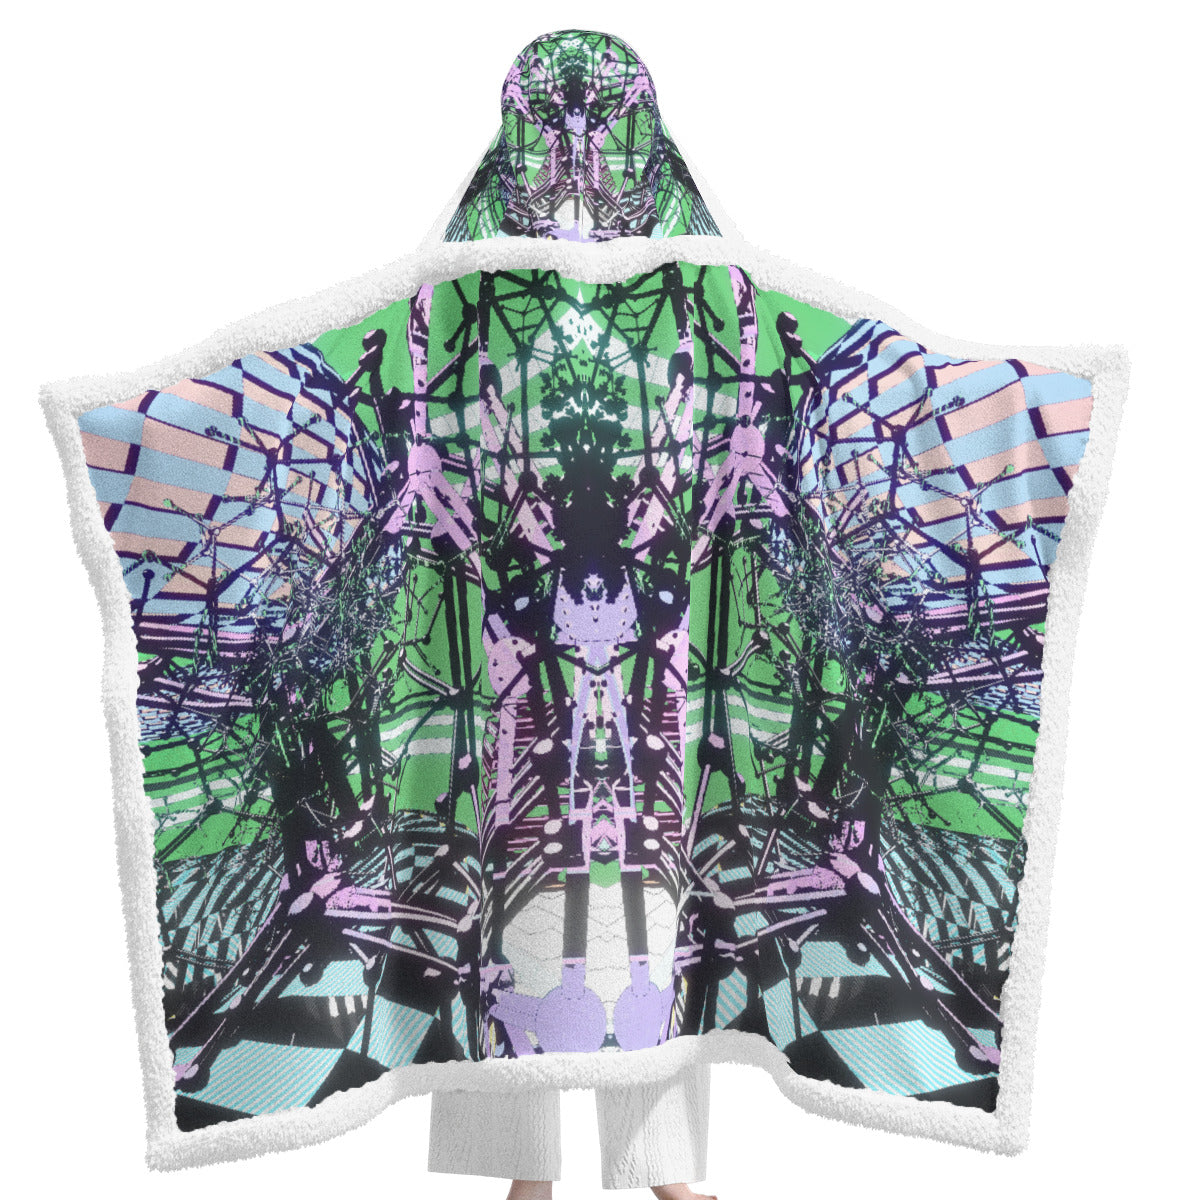 Psychedelic All-Over MicrodoseVR Print Unisex Wearable Hooded Blanket